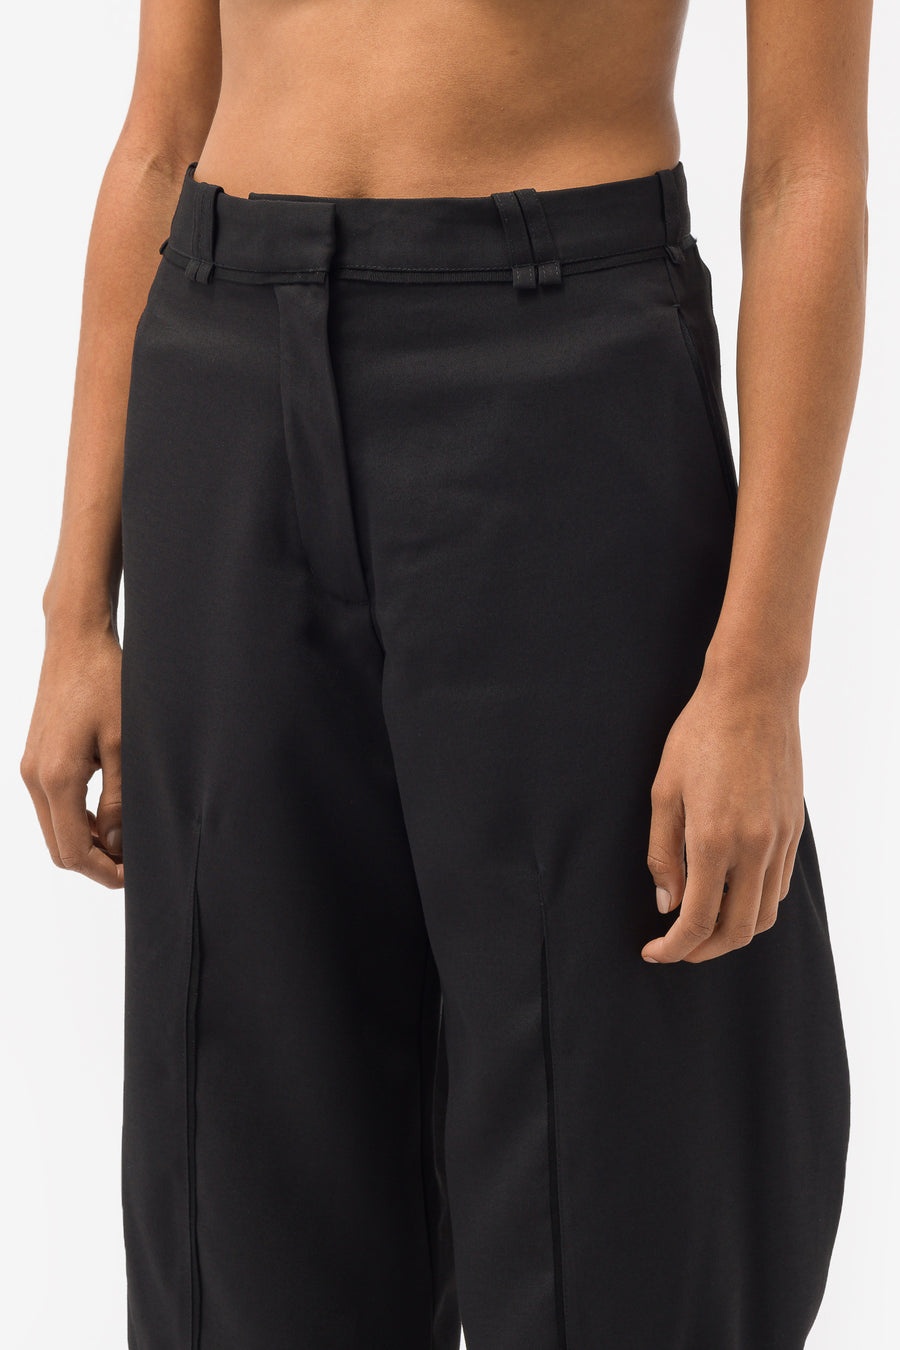 Hina Pleat Trousers in Crow Black - 4